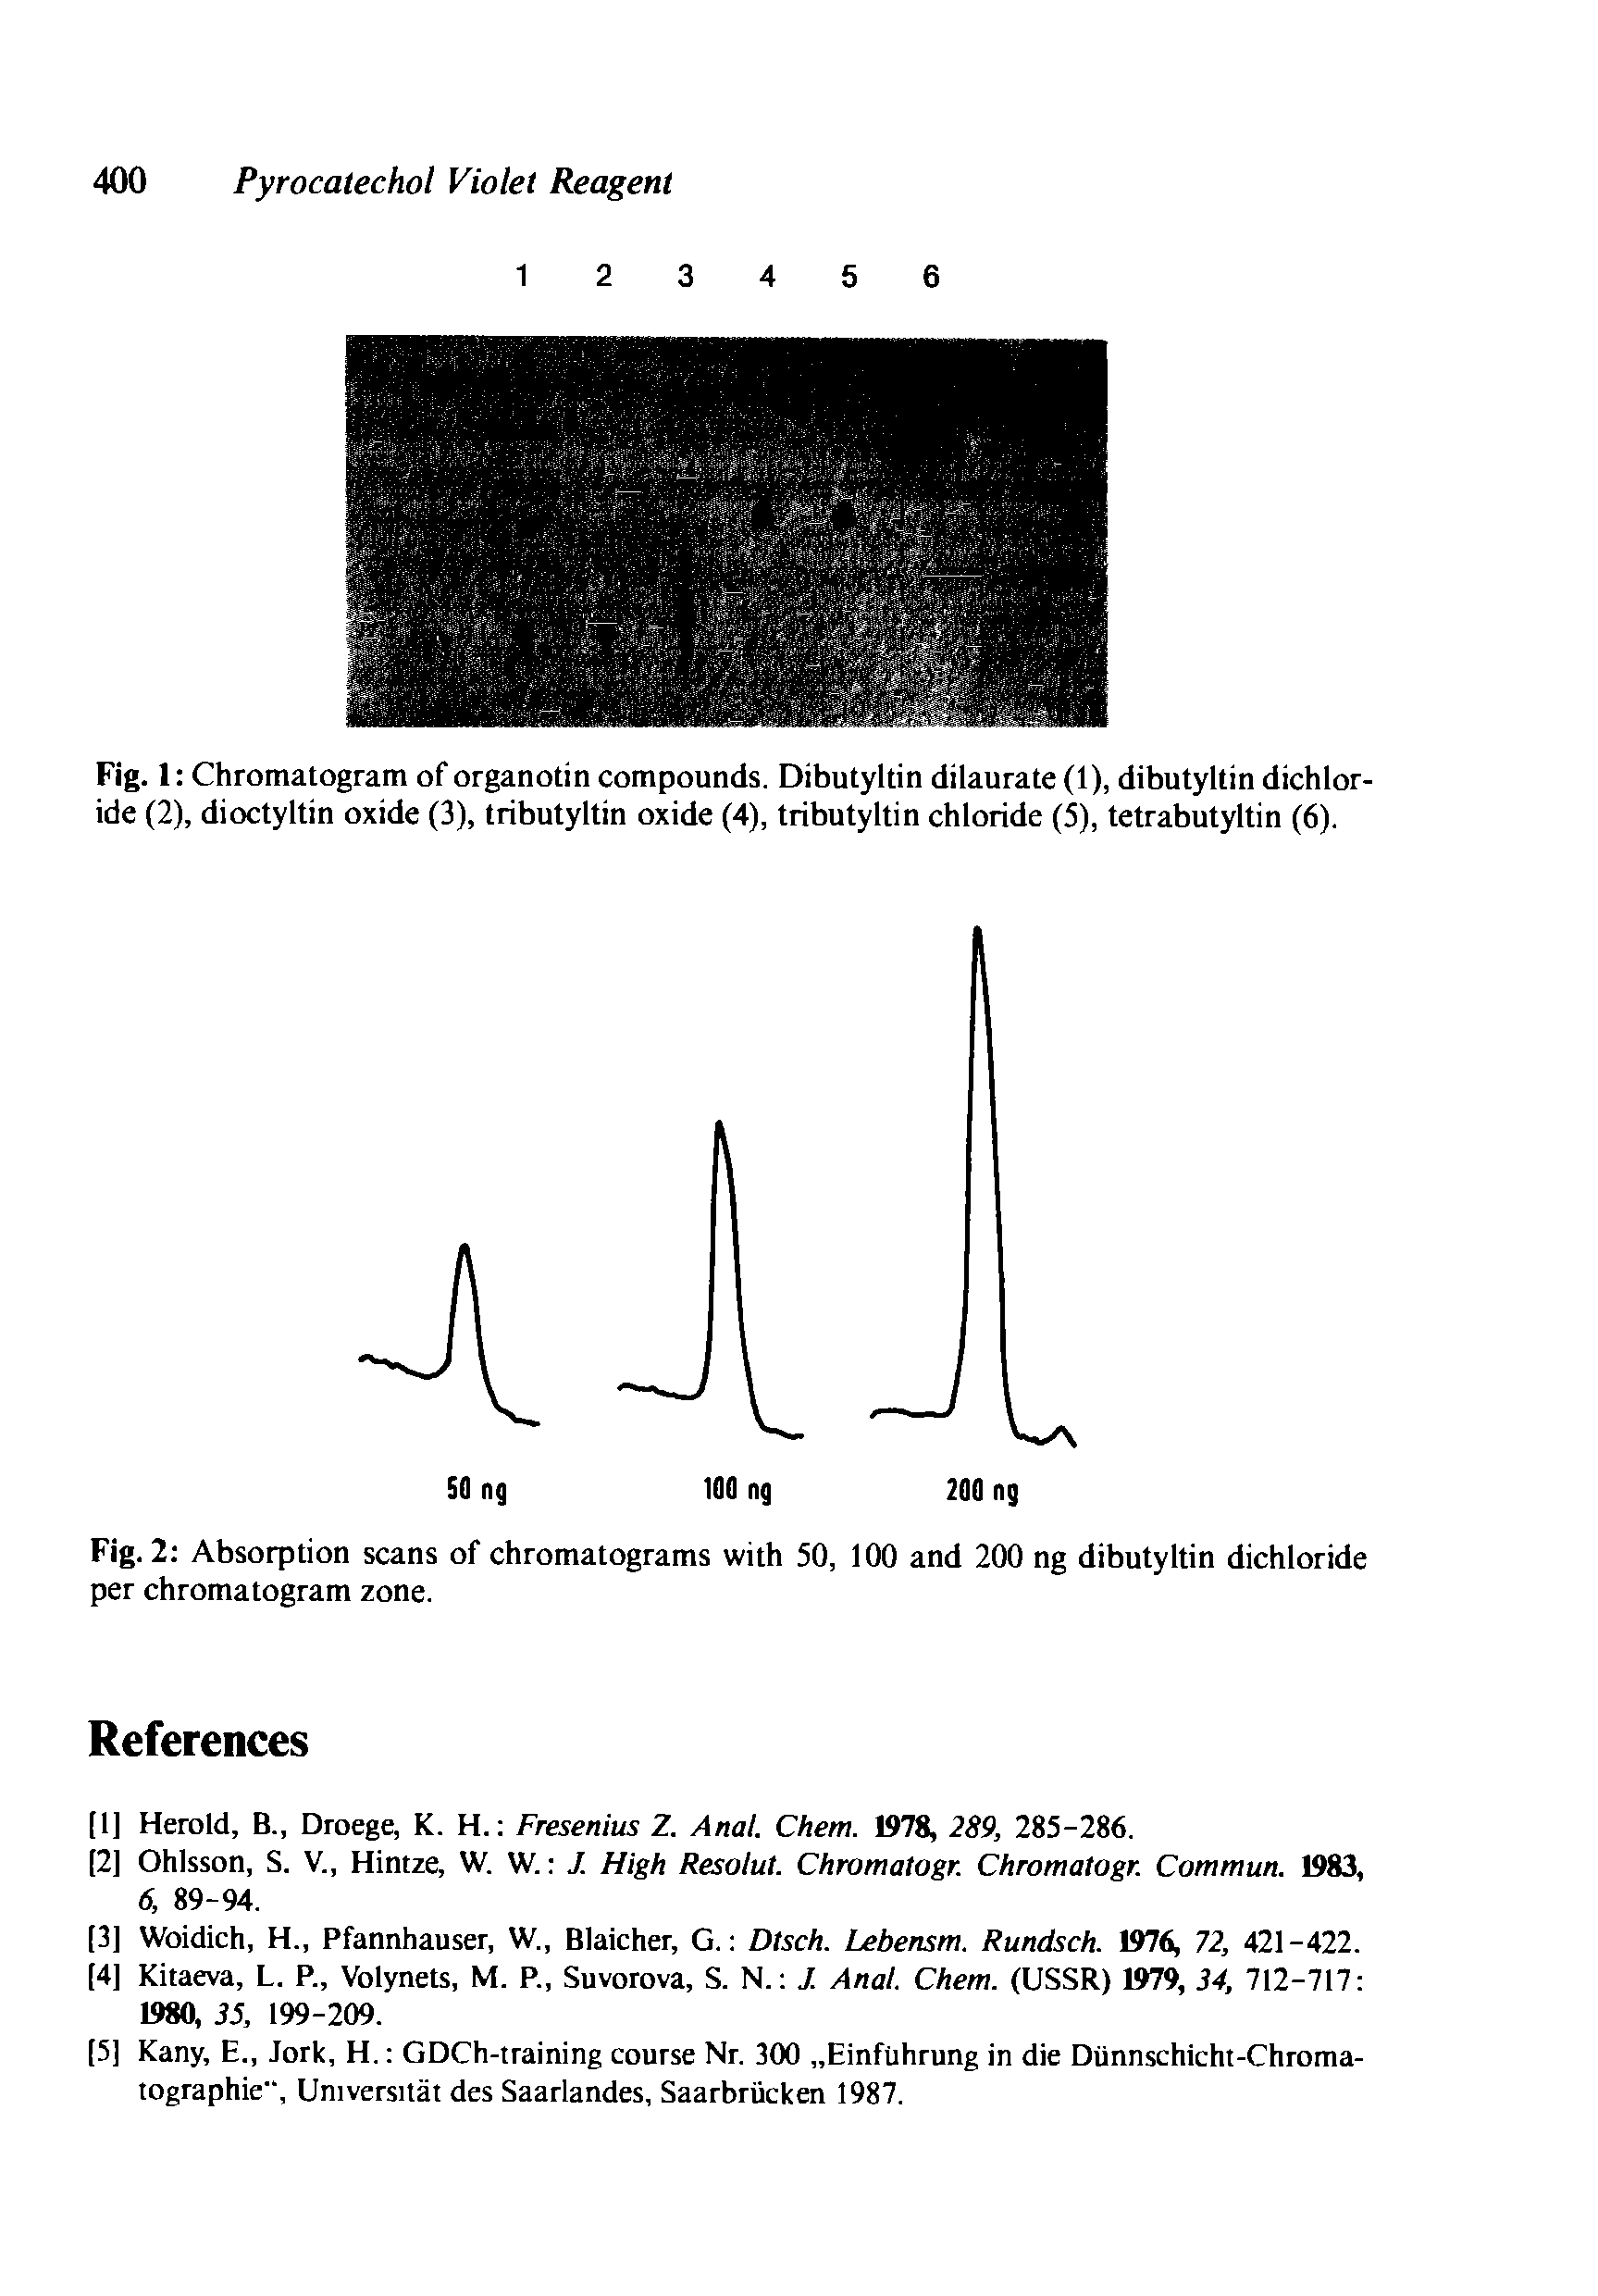 Fig. 2 Absorption scans of chromatograms with 50, 100 and 200 ng dibutyltin dichloride per chromatogram zone.